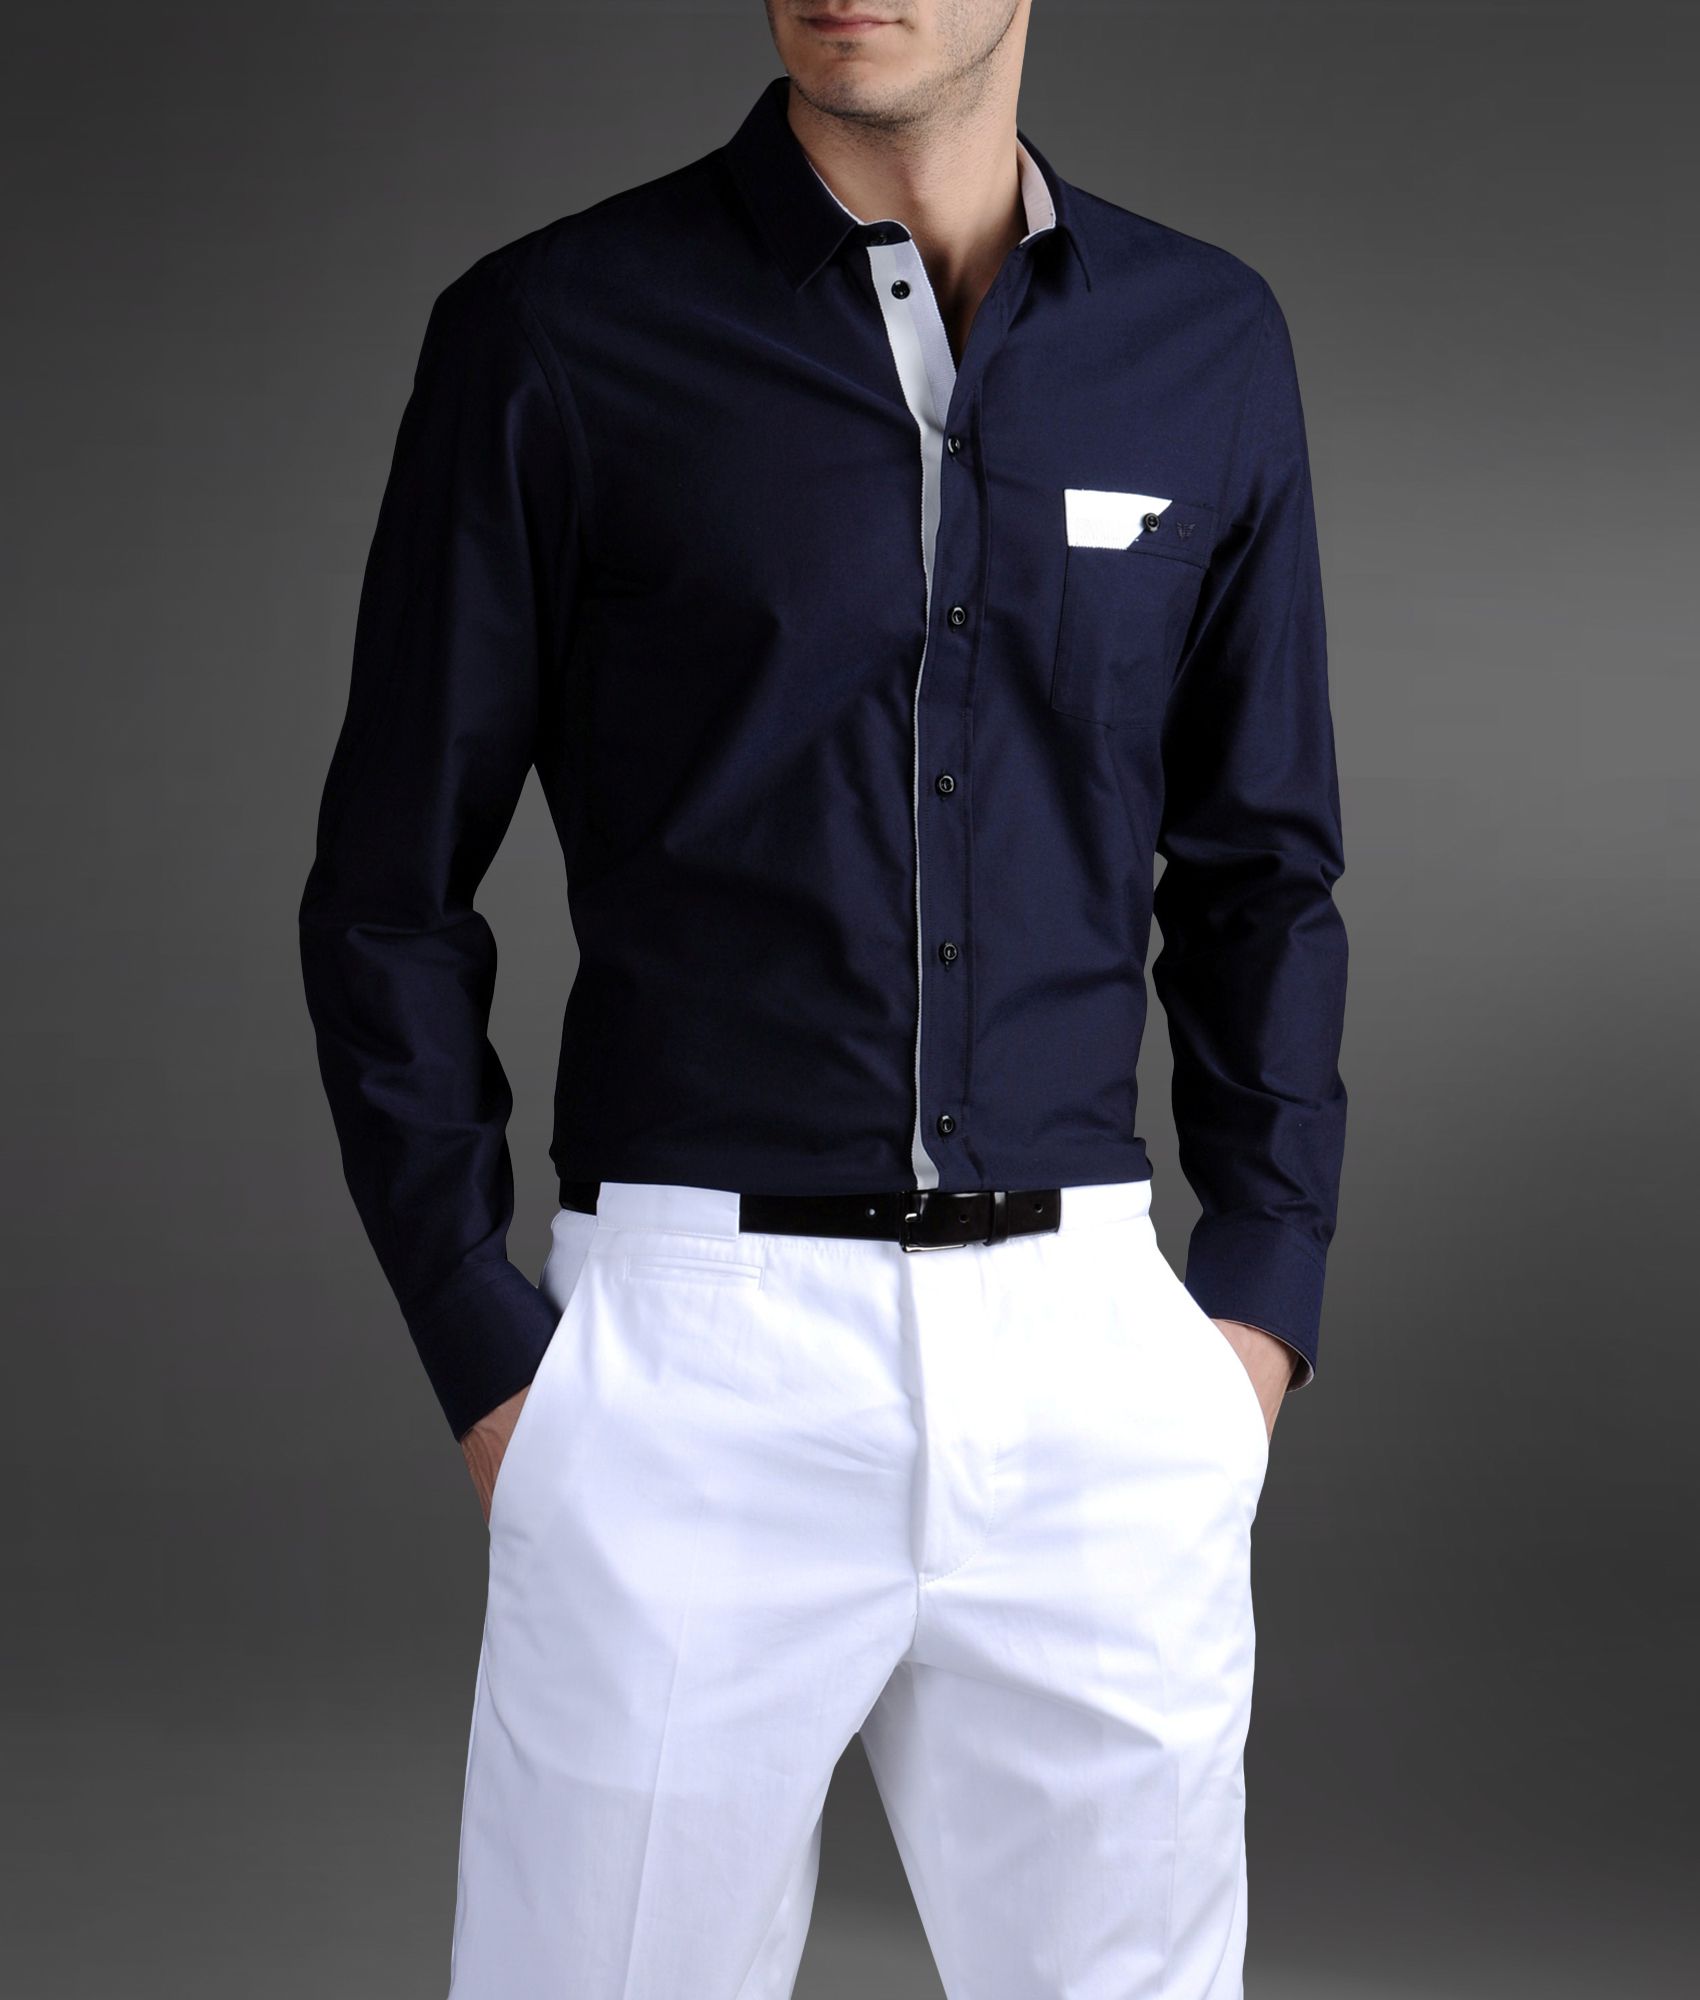 armani mens clothes, OFF 72%,Free Shipping